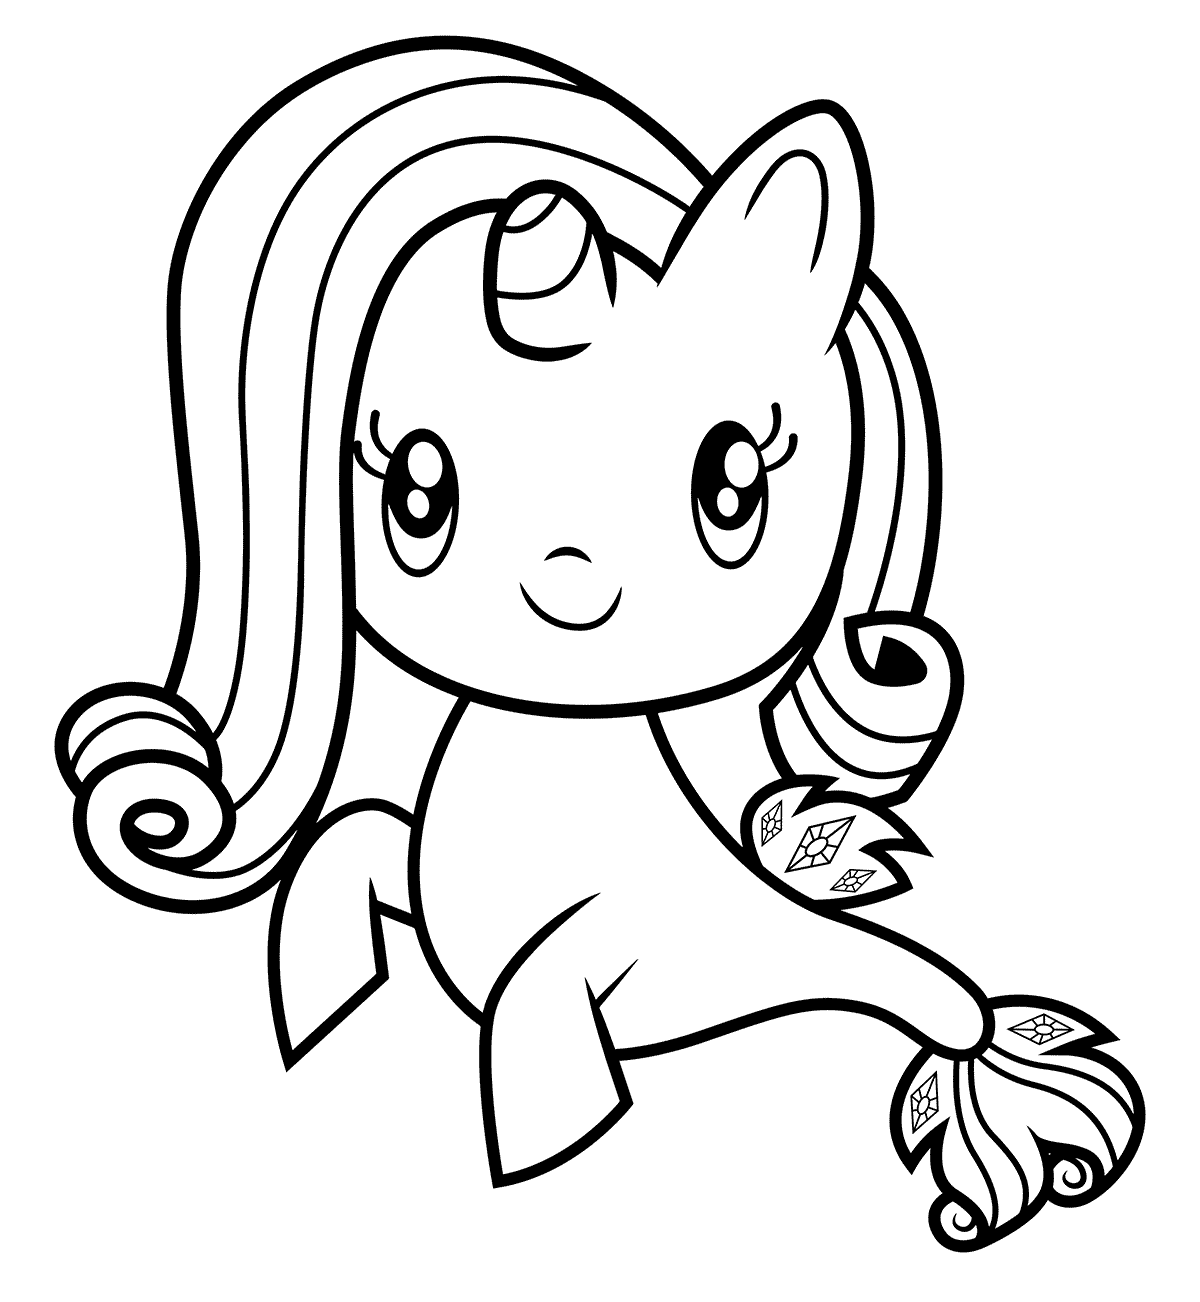 rarity coloring page rarity coloring page free my little pony friendship is rarity coloring page 